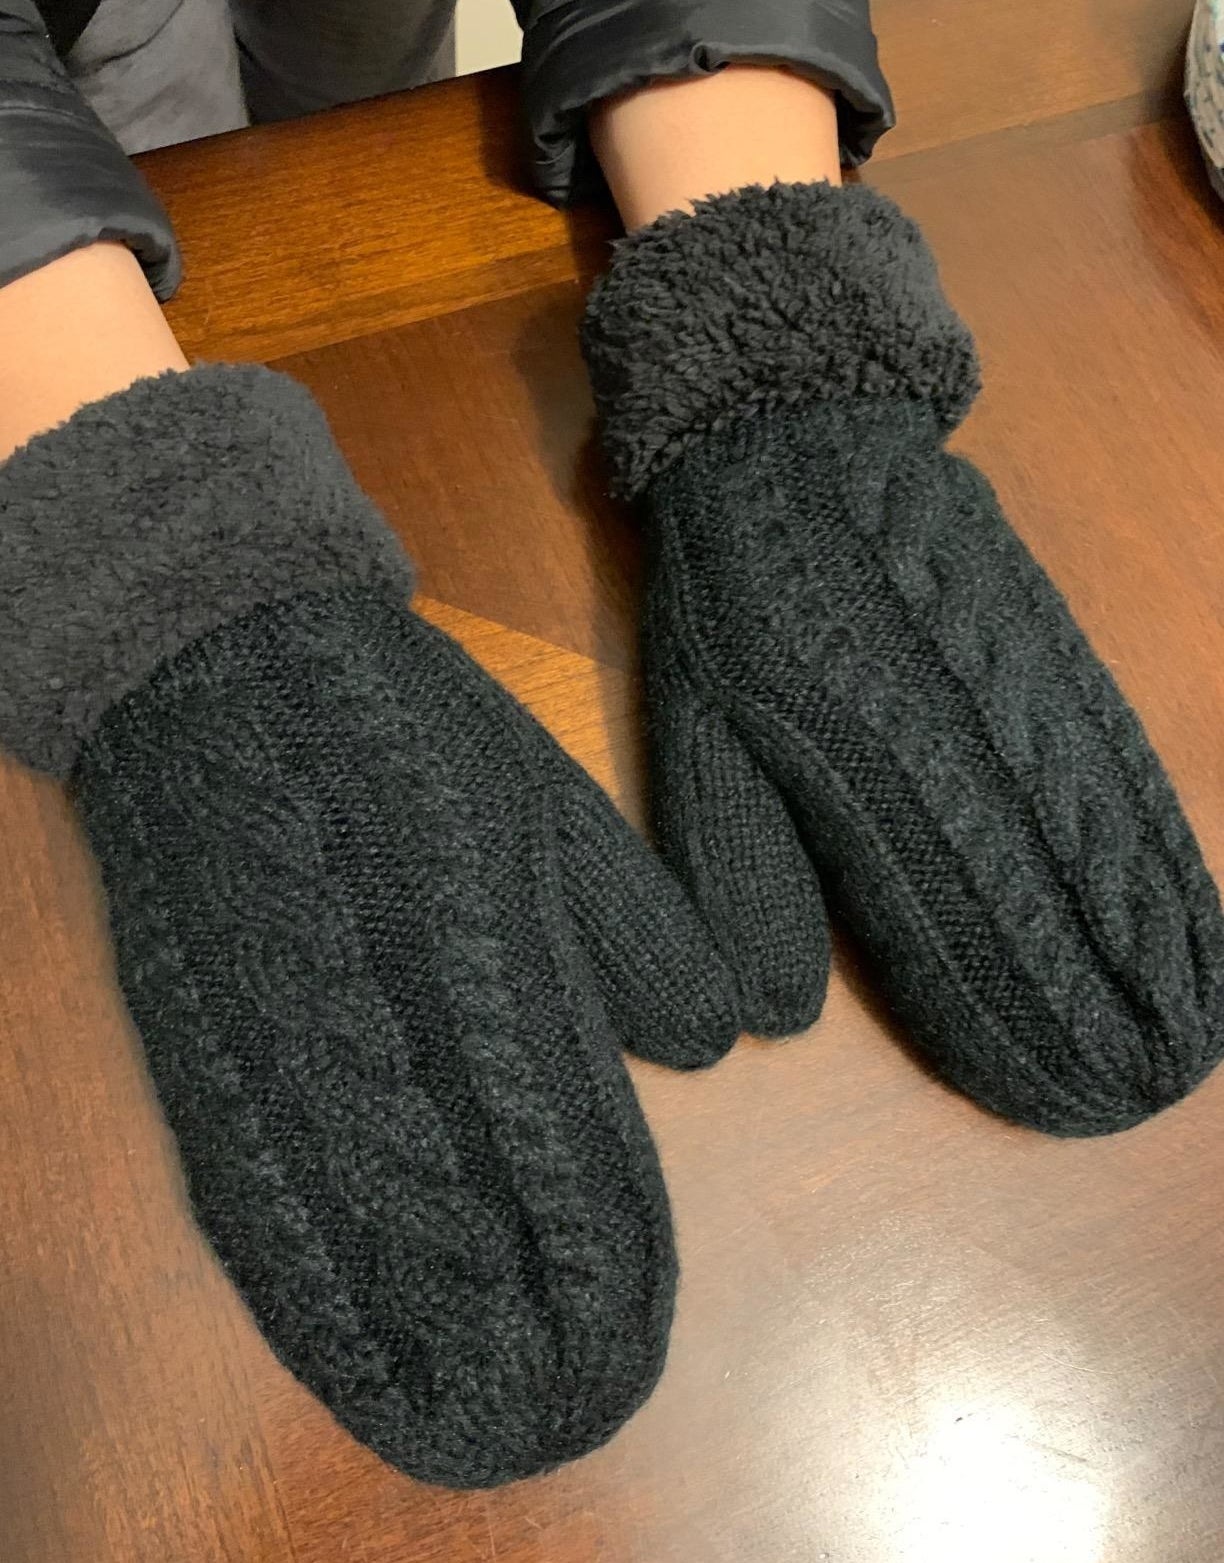 A reviewer wearing the mittens in black